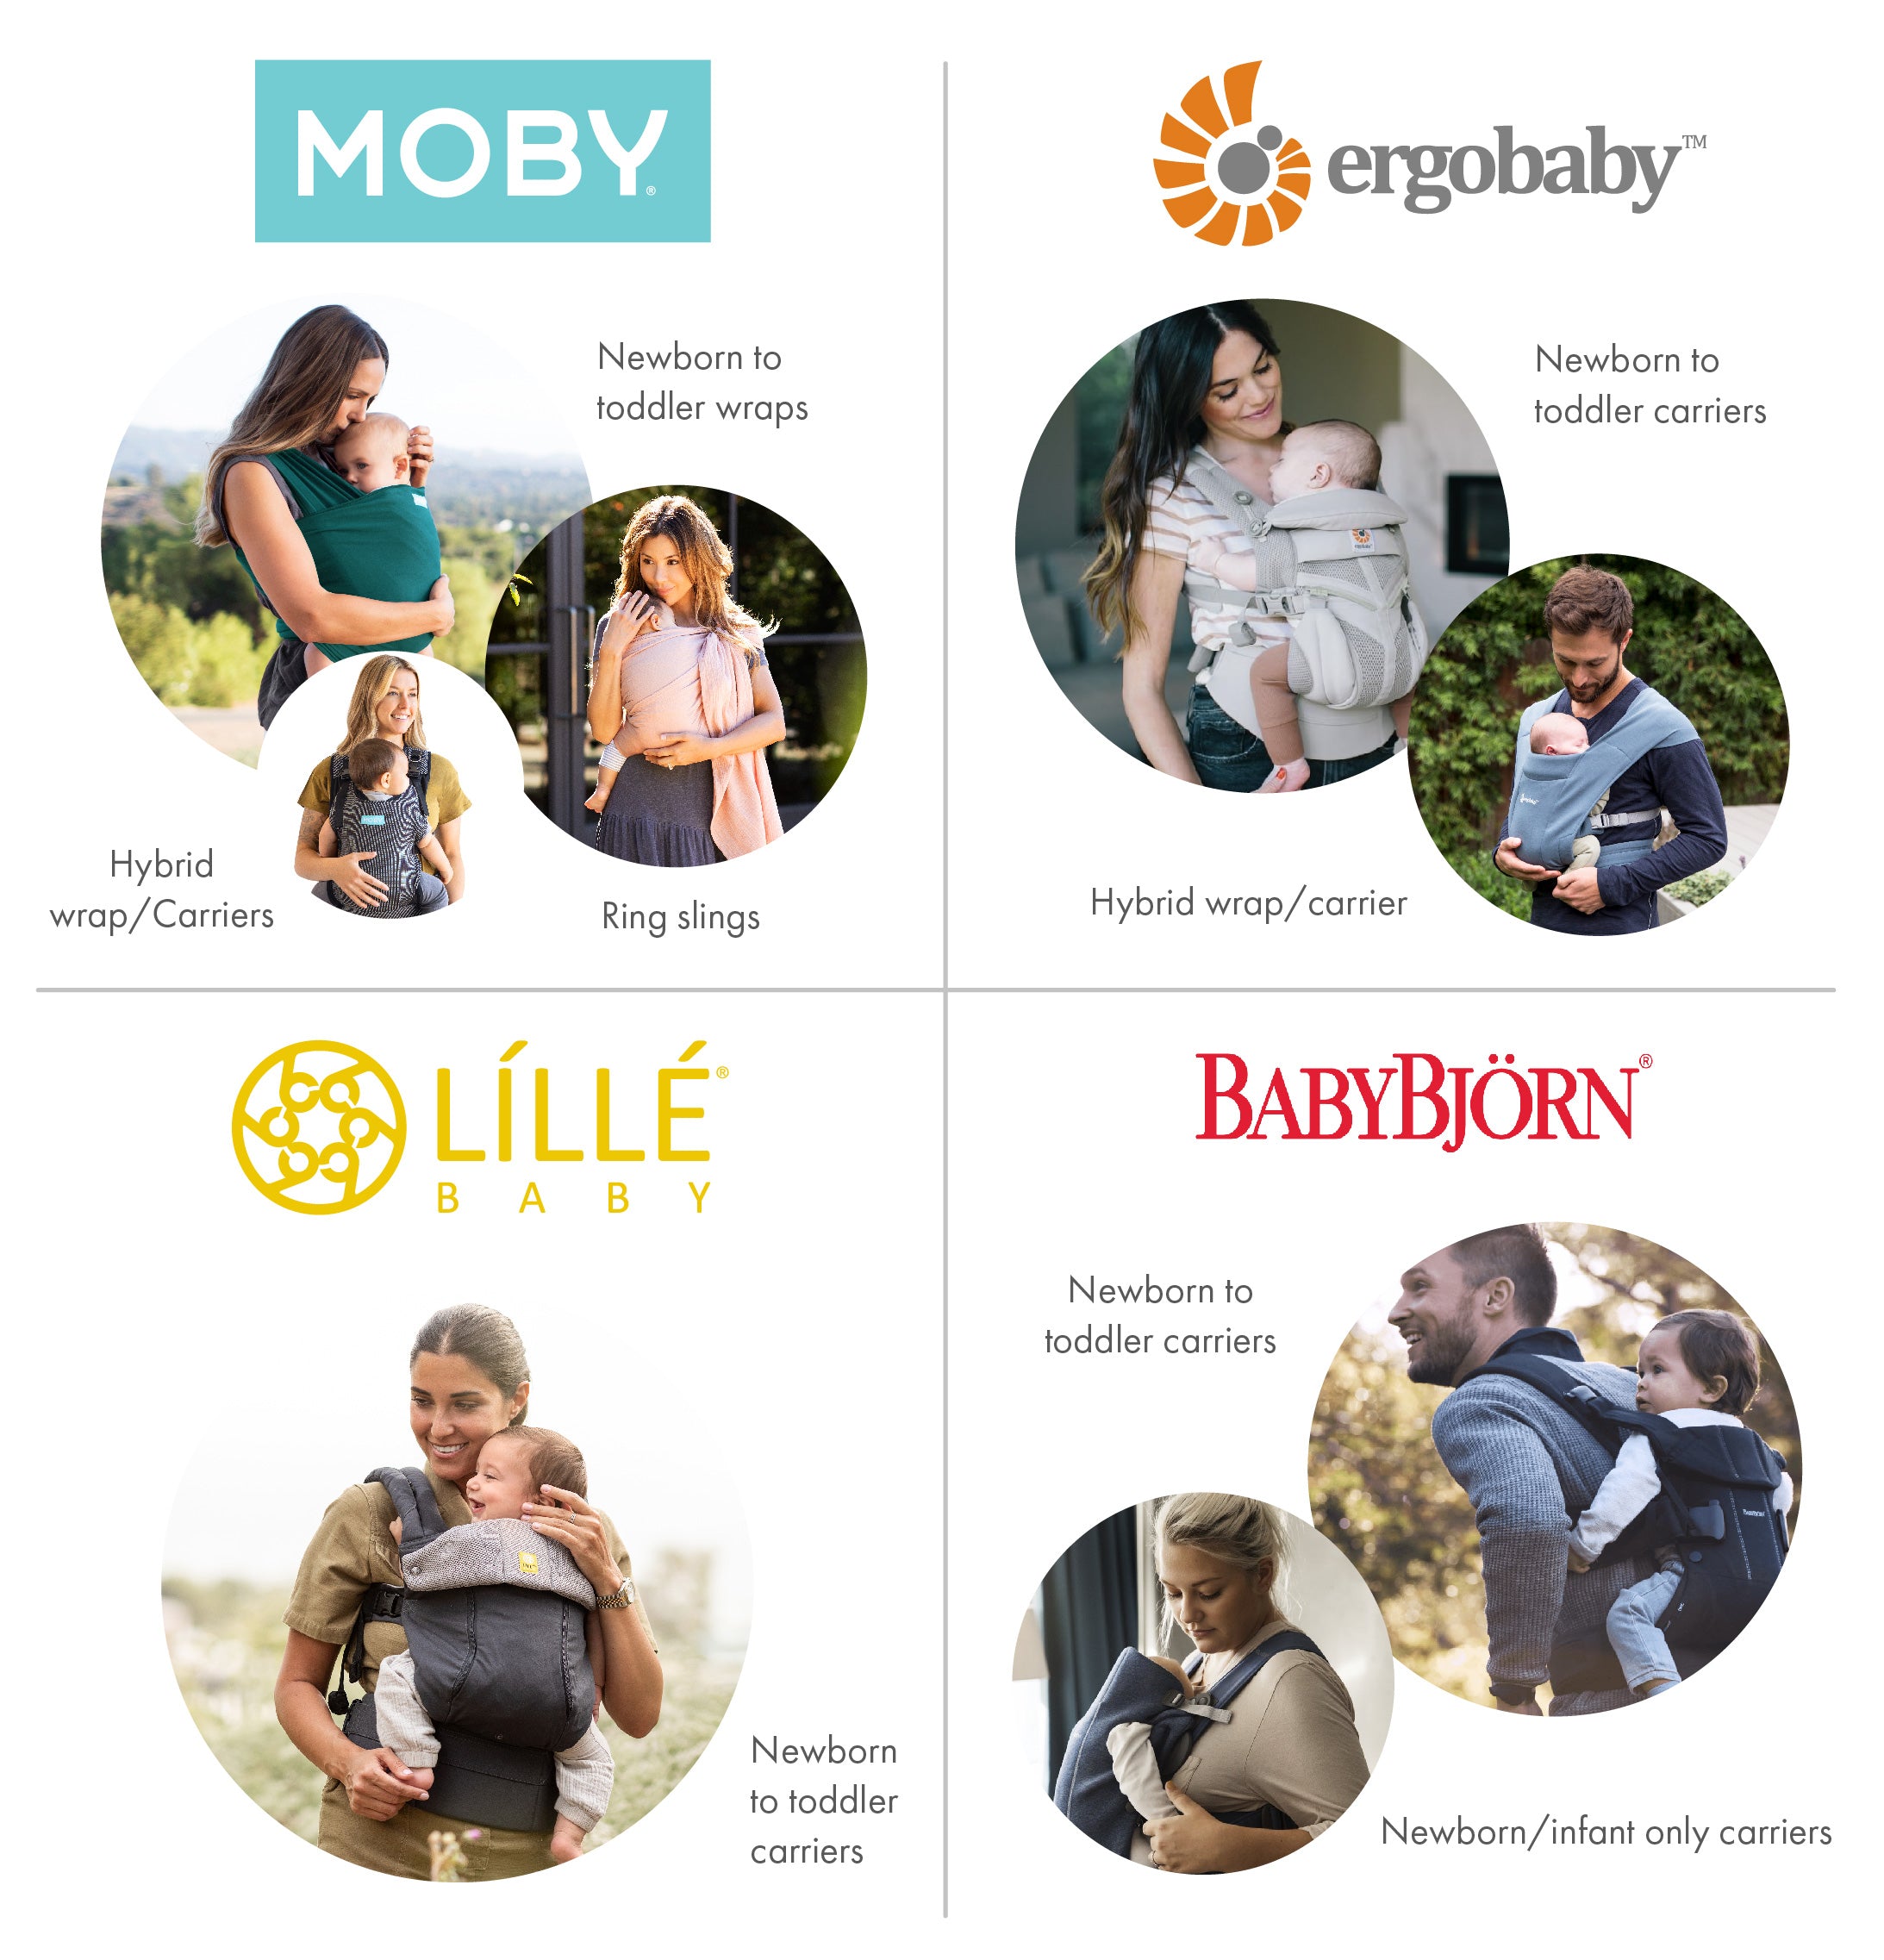 Belly Beyond stock a wide range of babywearing products, including MOBY's wraps, ring slings, hybrid carriers, and carriers, and the leading ranges of carrier from Ergobaby, LILLEbaby, and BabyBjorn.